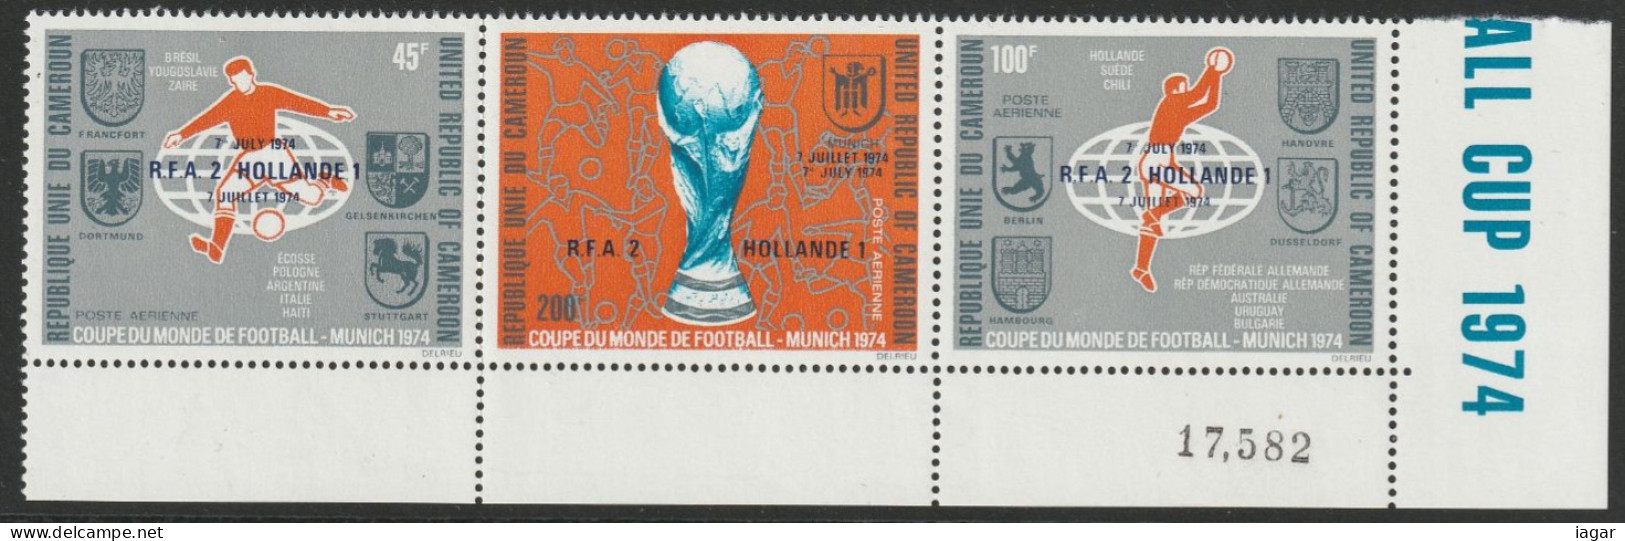 THEMATIC SPORT:  WINNER OF WORLD FOOTBALL CHAMPIONSHIP,  GERMANY ' 74.  "R.F.A. 2 HOLLANDE 1" OVERPRINTED   -  CAMEROUN - 1974 – Alemania Occidental